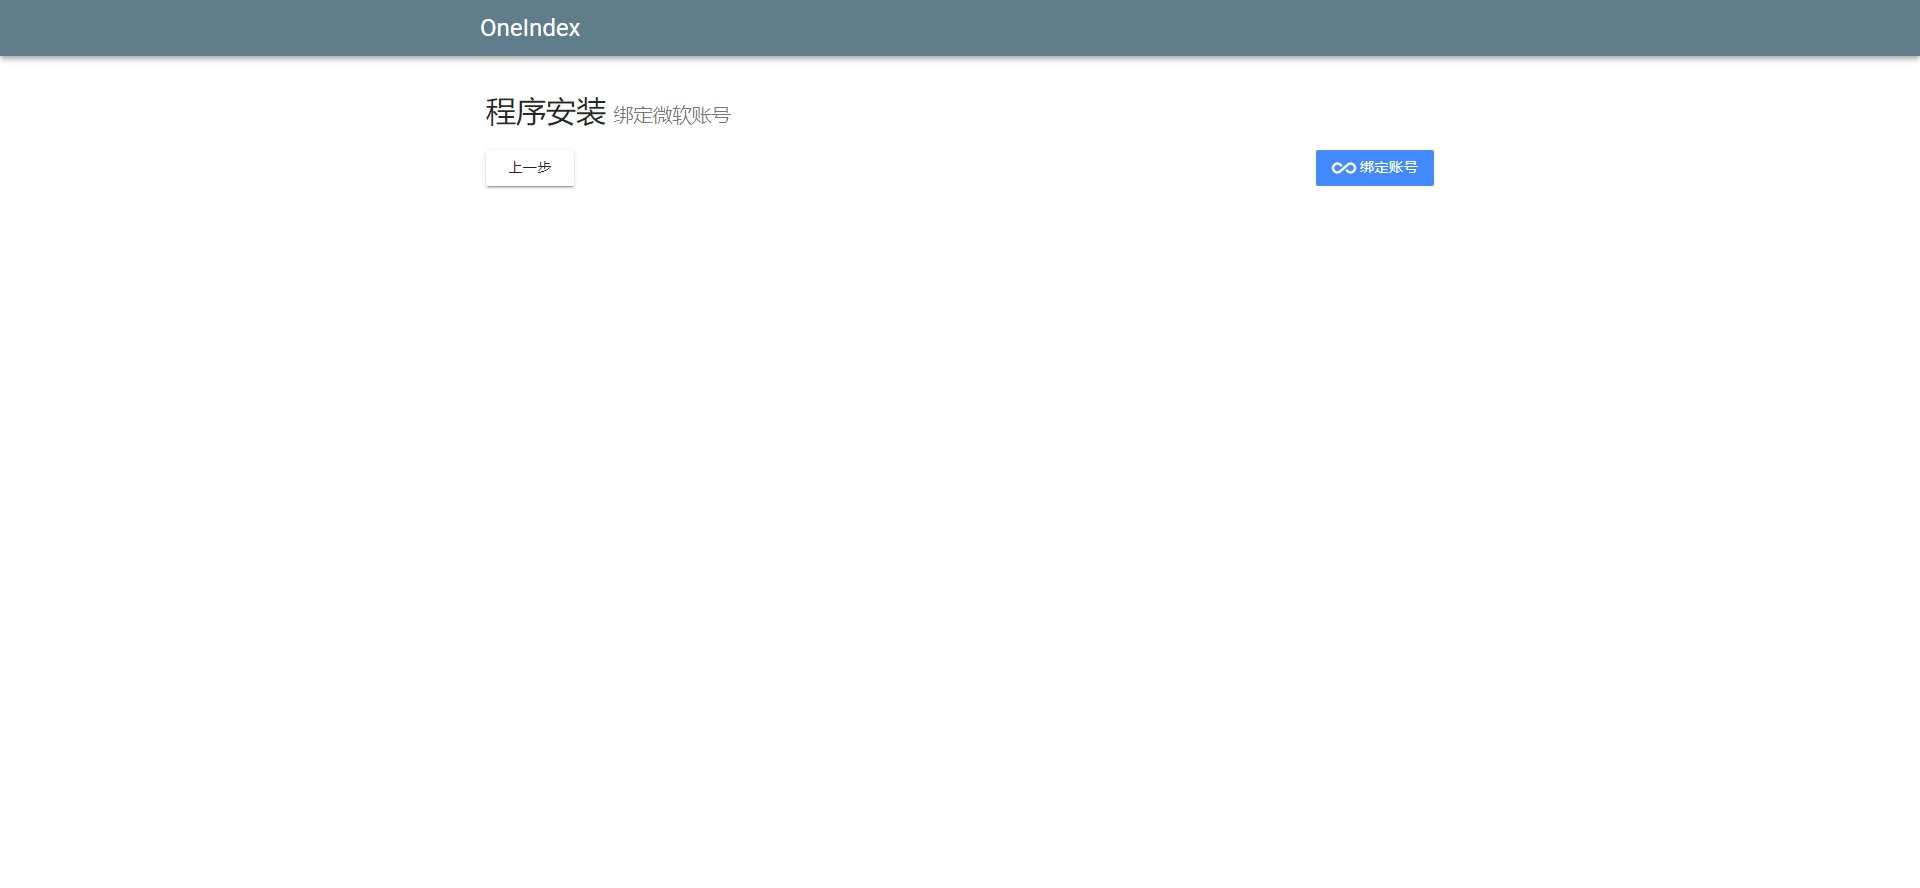 OneIndex 绑定账号.png